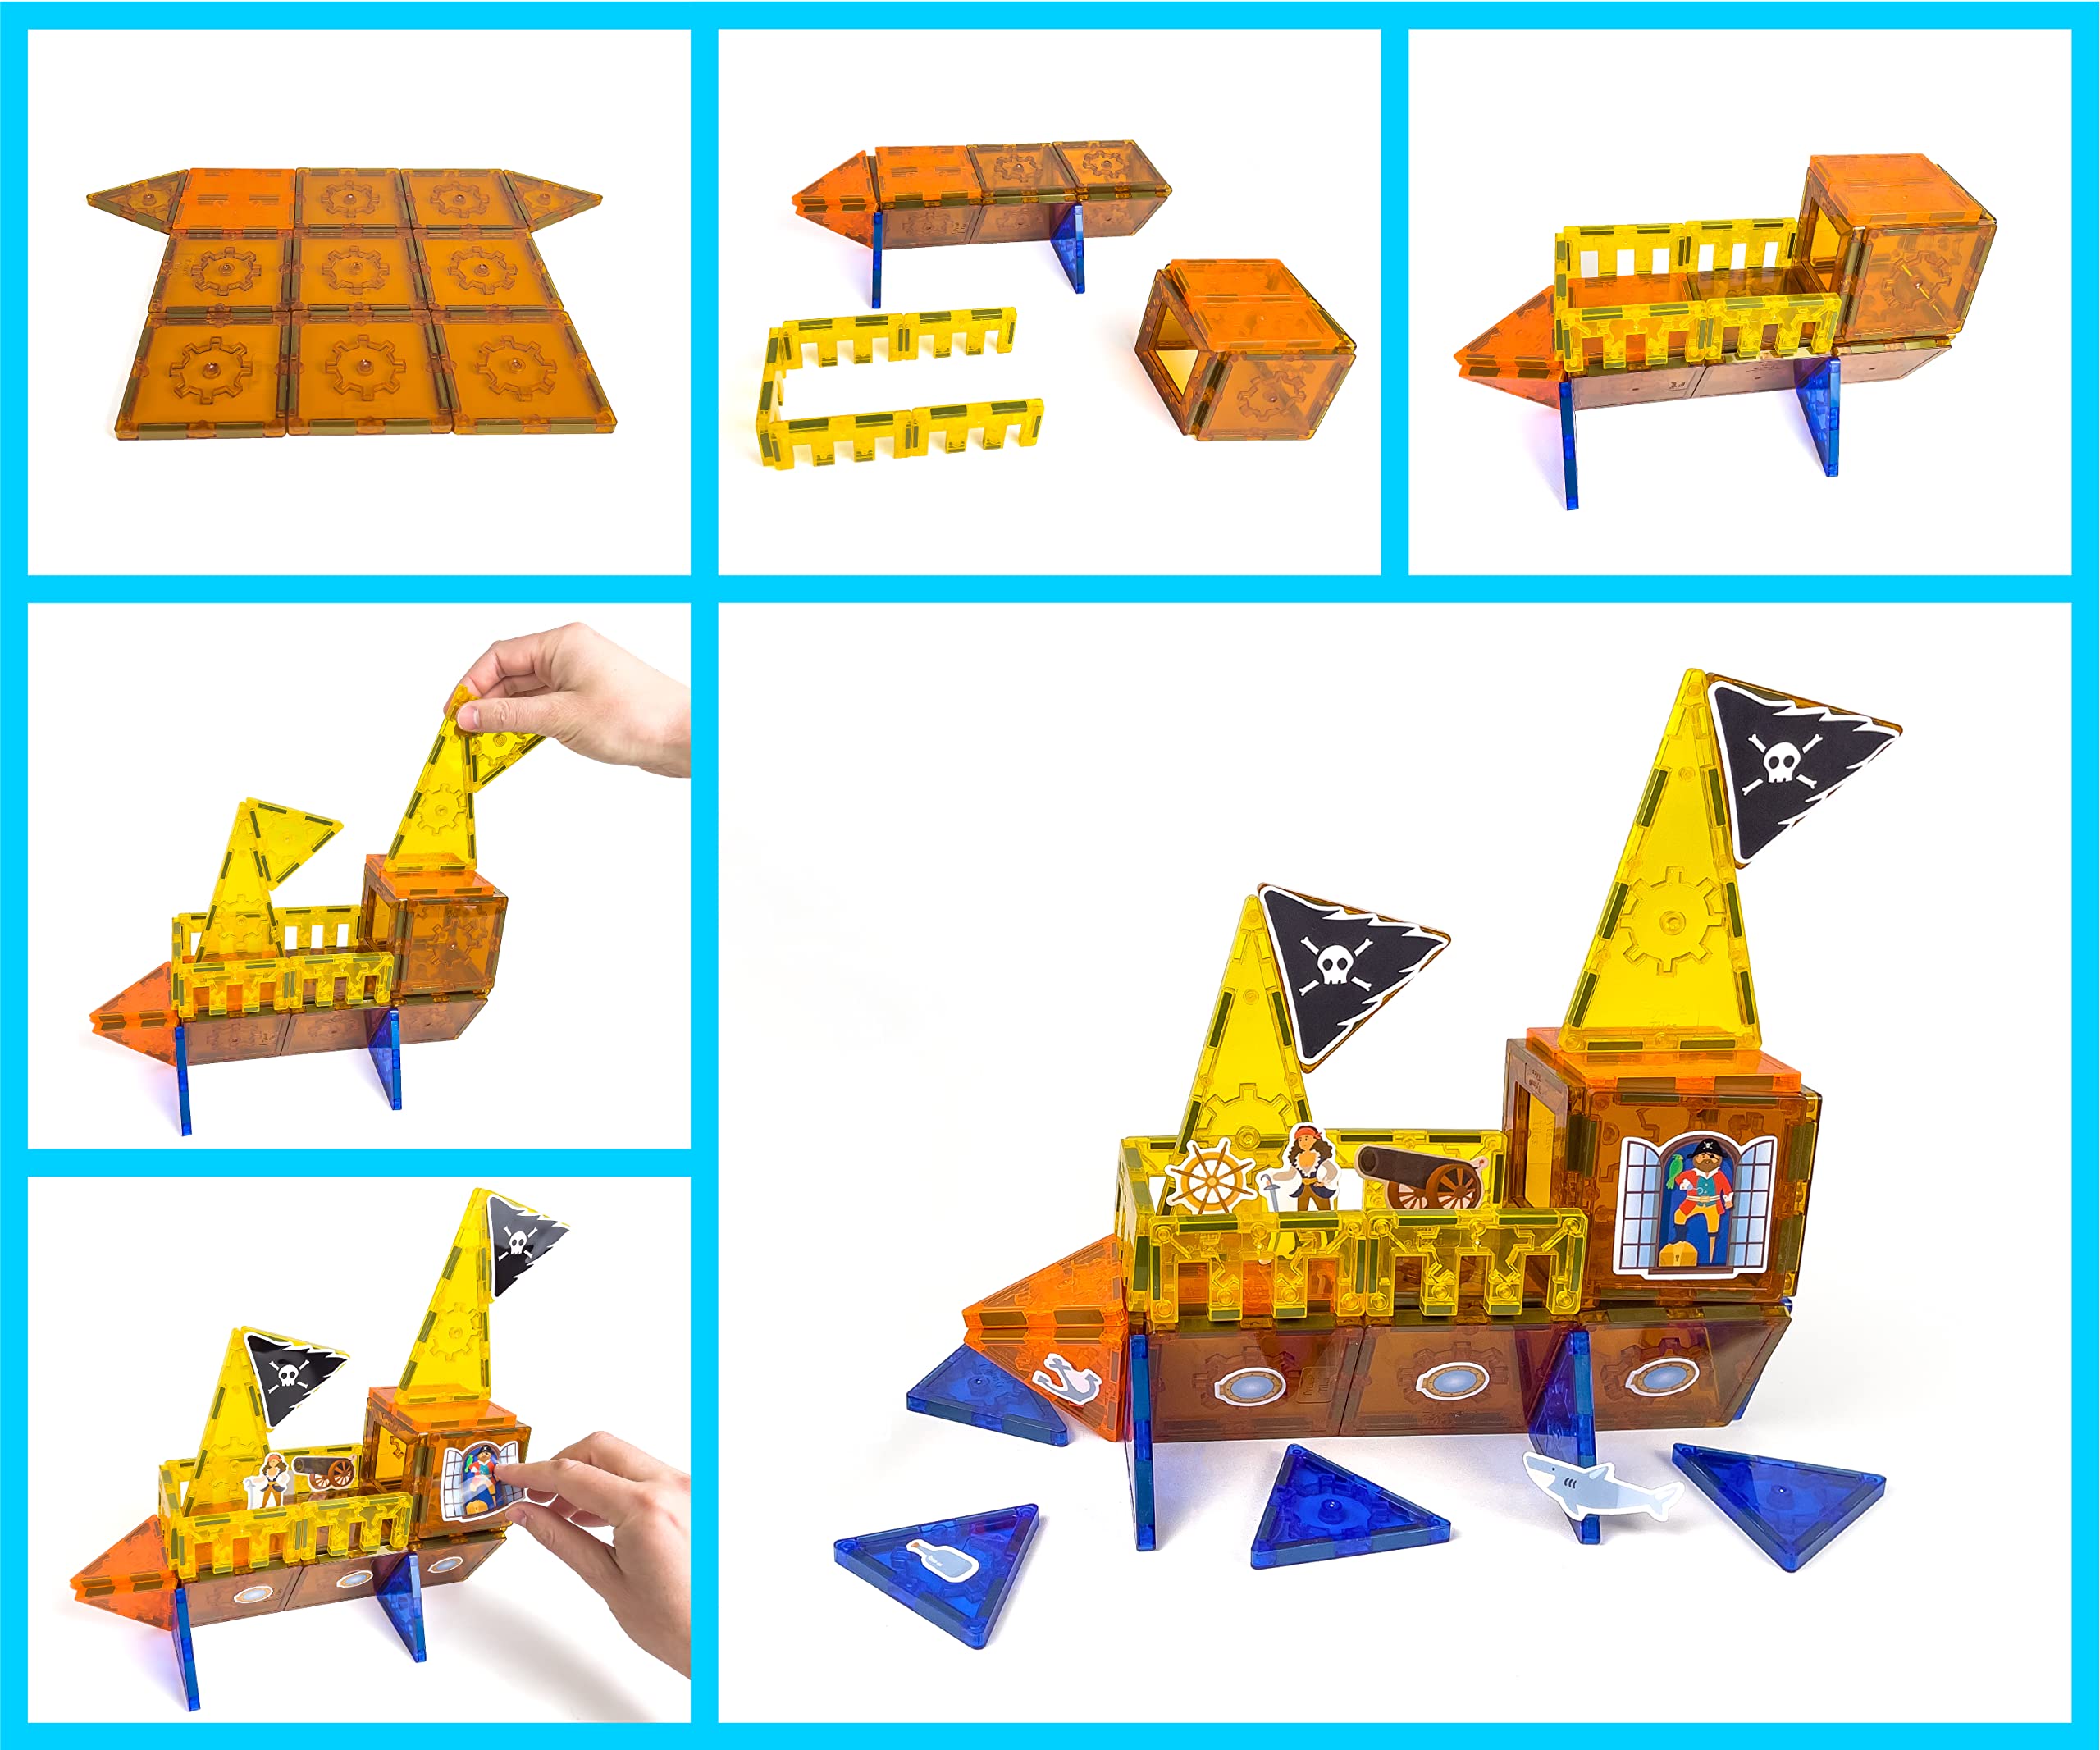 Tytan Tiles Pirate Ship & Island 60-Piece Magnetic Tiles Building Set, Fun Kids’ STEM Toy, Creative Play, Shape & Pattern Recognition, Fine Motor Skills, Includes Storage Bag, Ages 3+